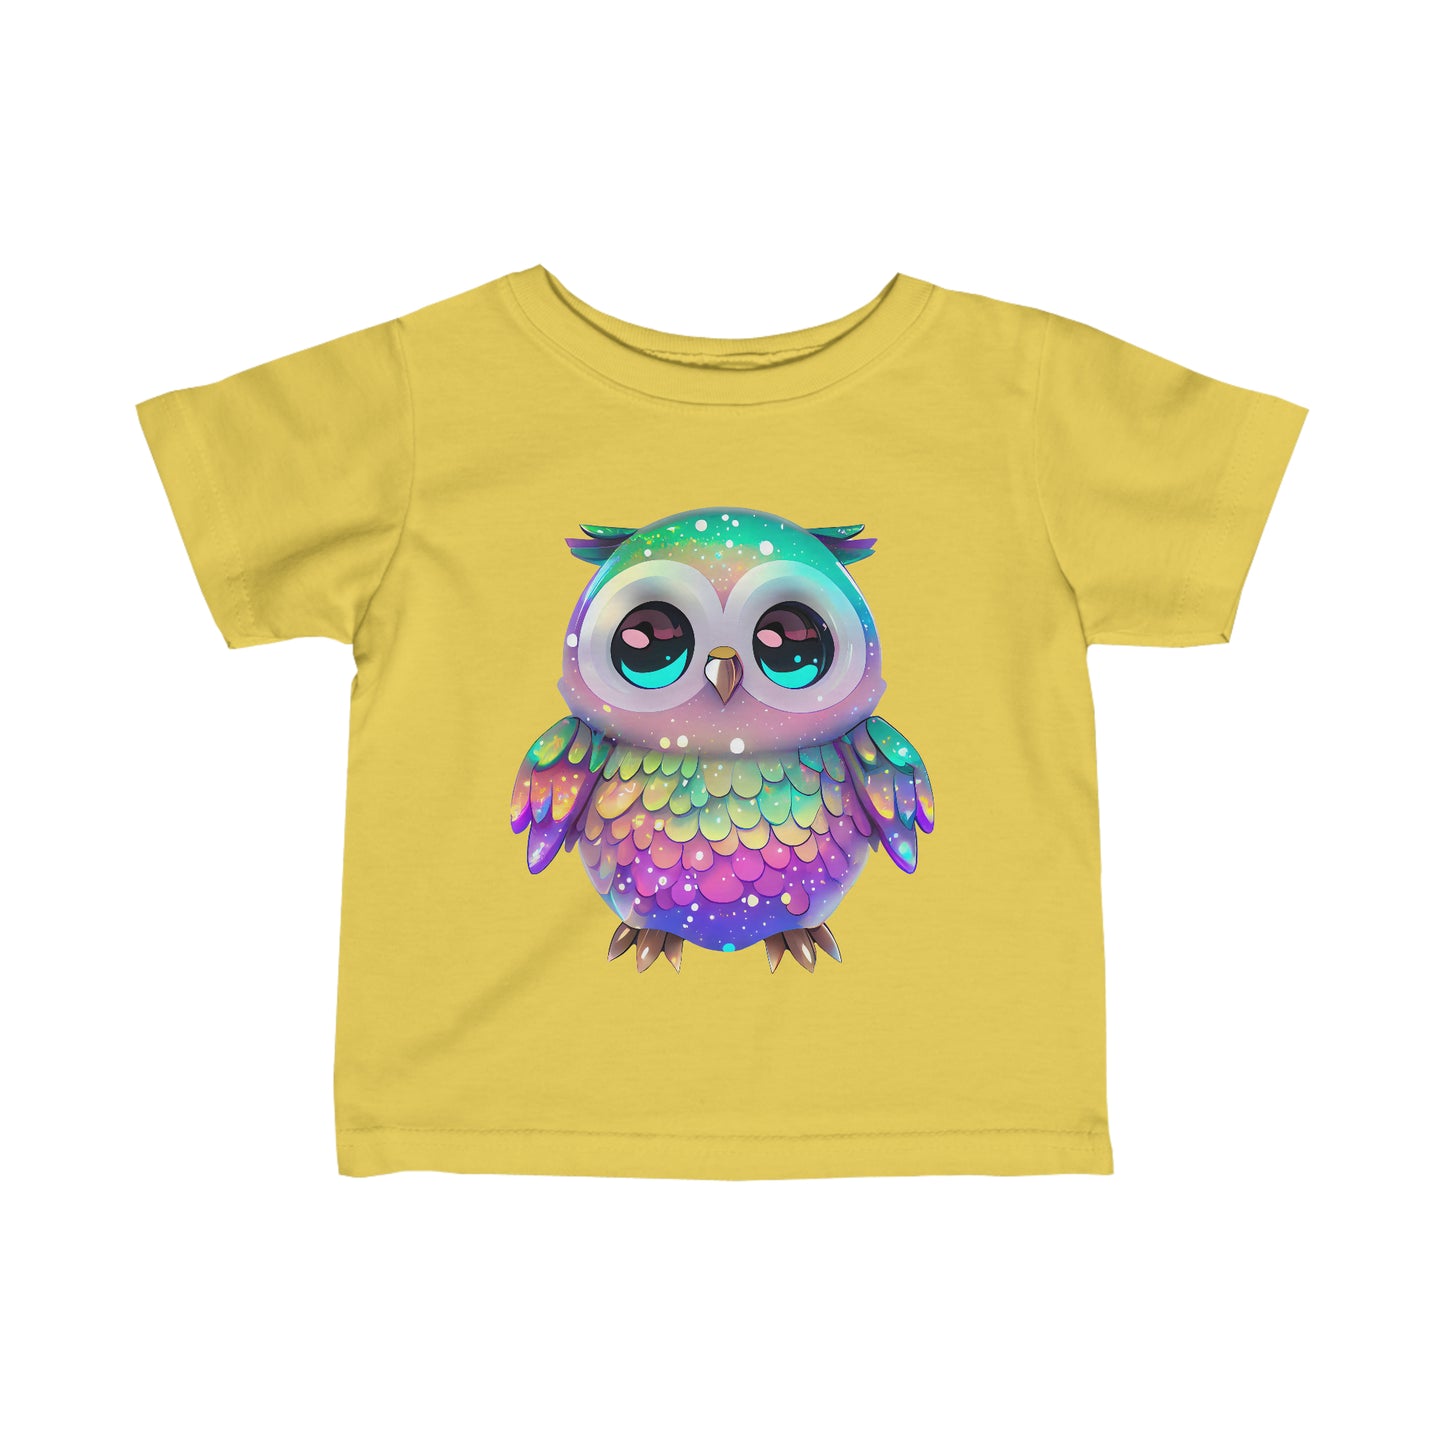 Iridescent Owl Infant Fine Jersey Tee, Sizes 6 Months - 24 Months